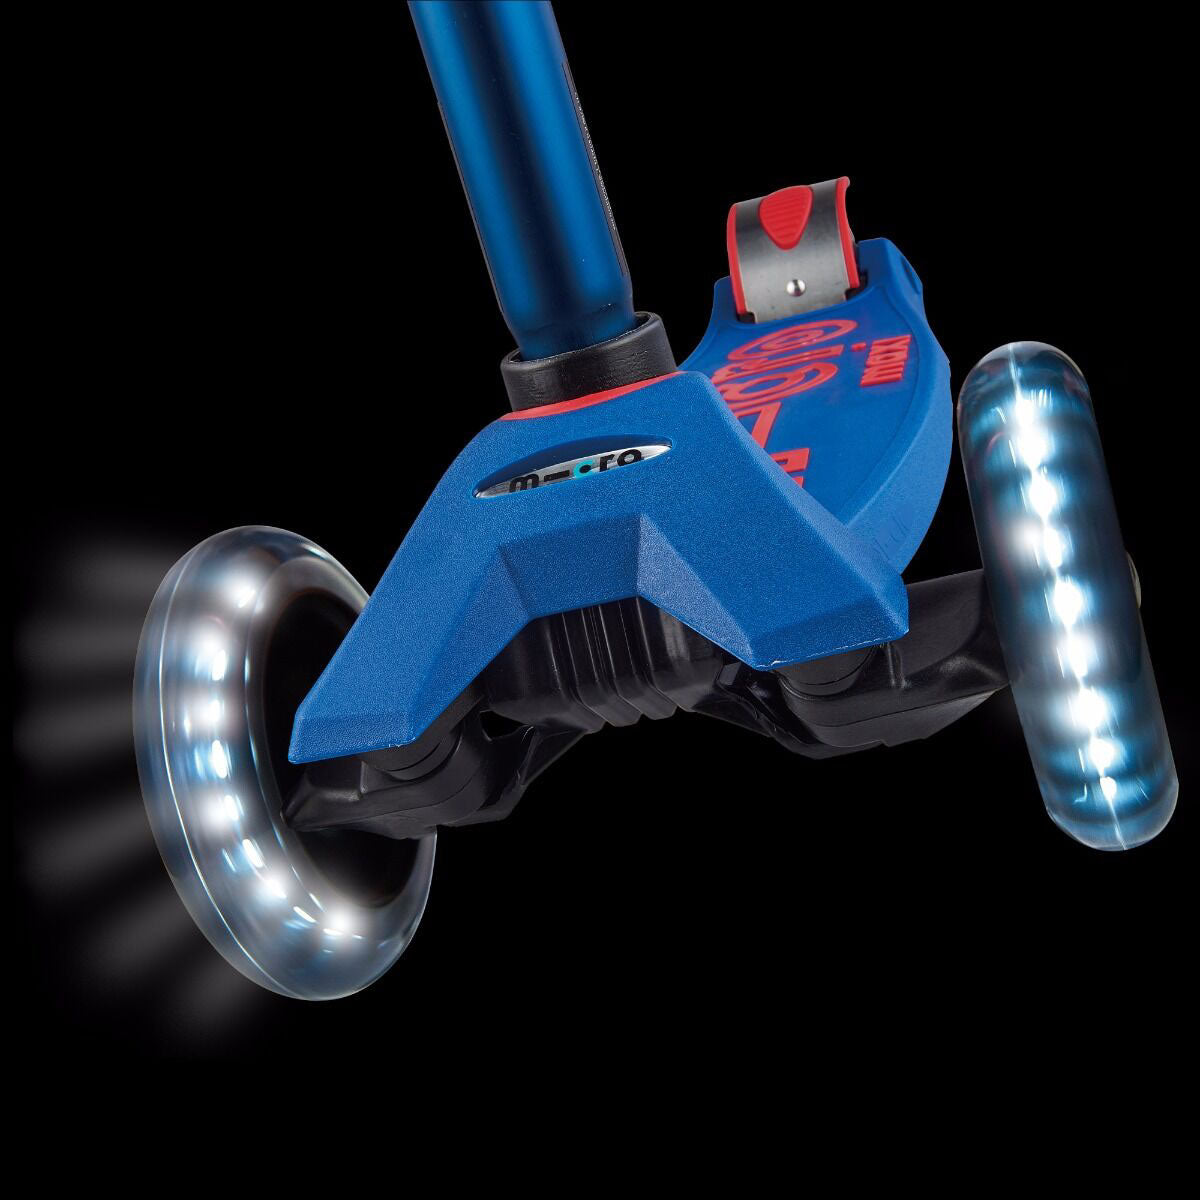 Maxi Deluxe Scooter with LED Wheels From Micro Kickboard